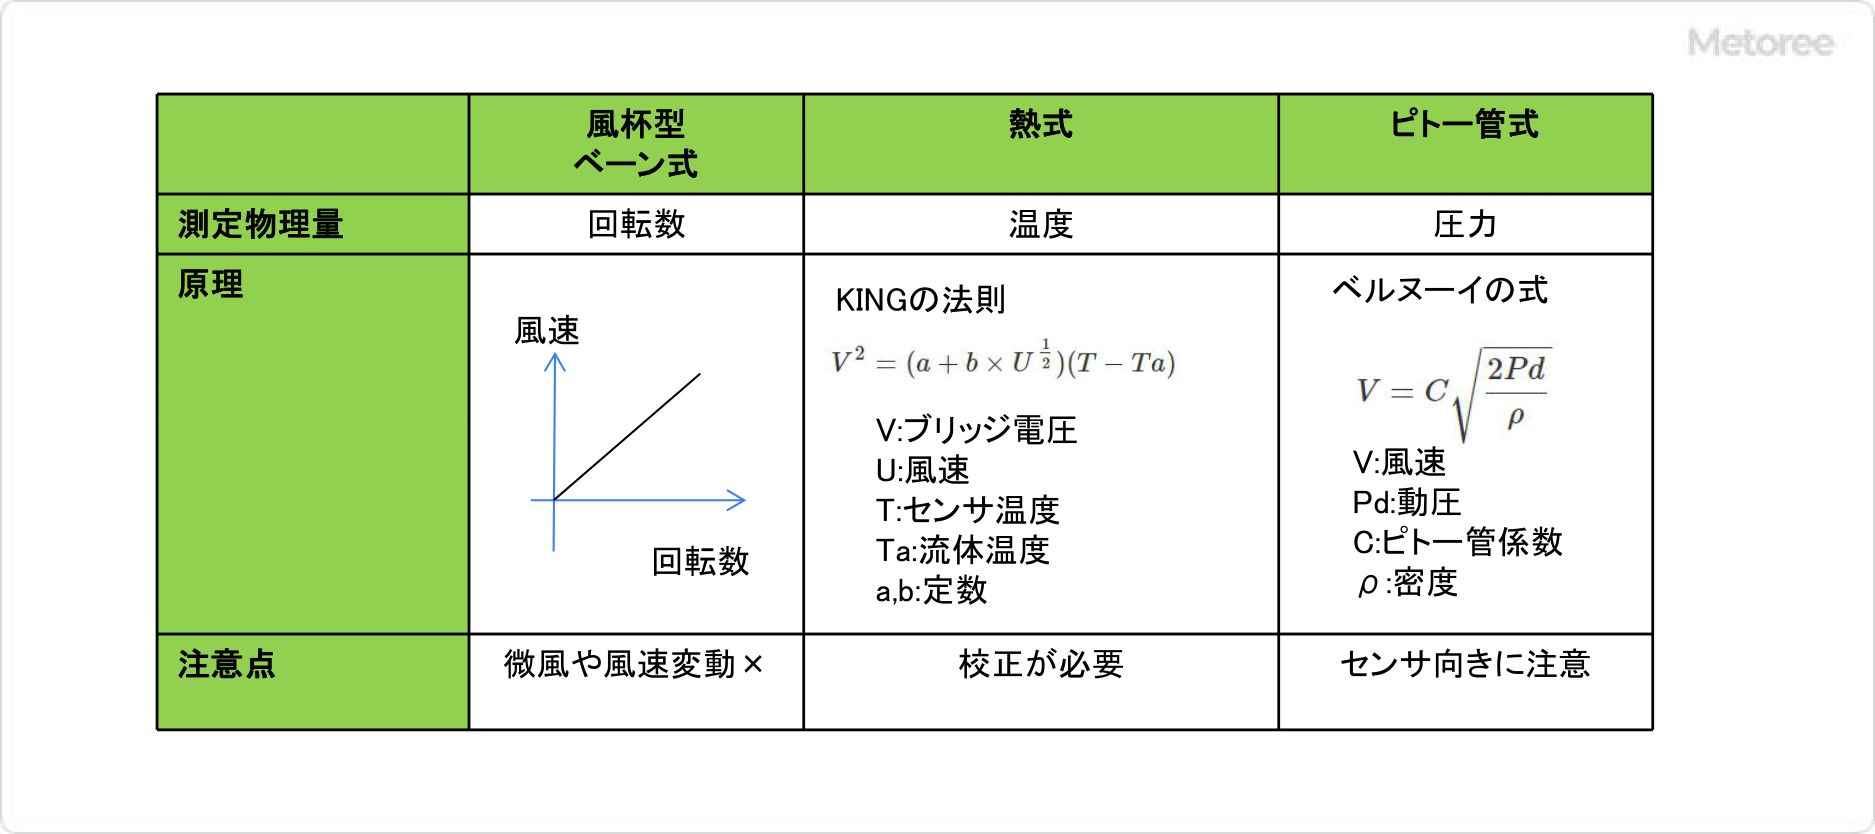 Fig3　風速計の比較